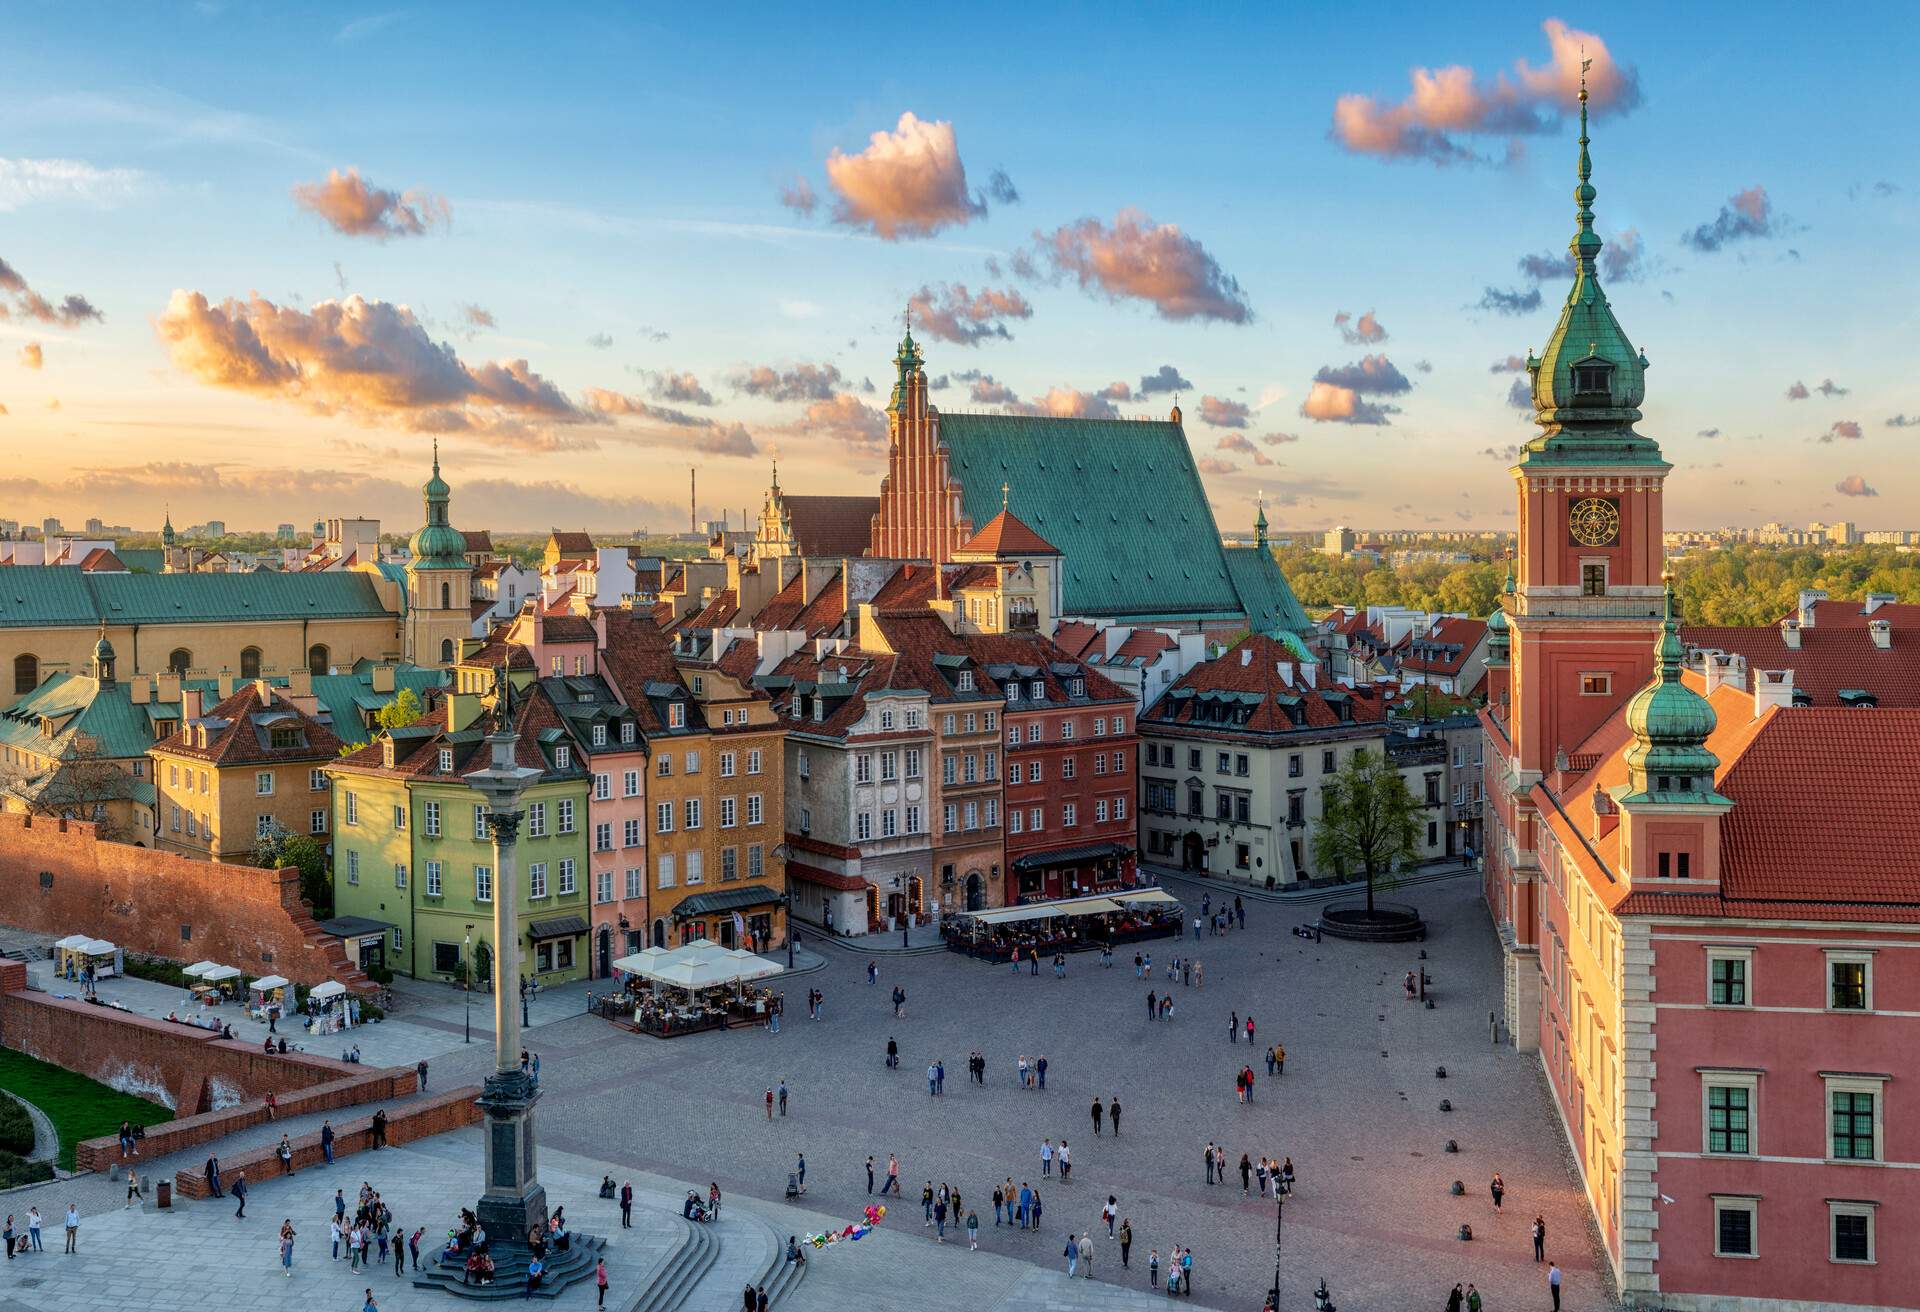 DEST_POLAND_WARSAW_OLD-TOWN_MARKET-SQUARE_GettyImages-1009606890